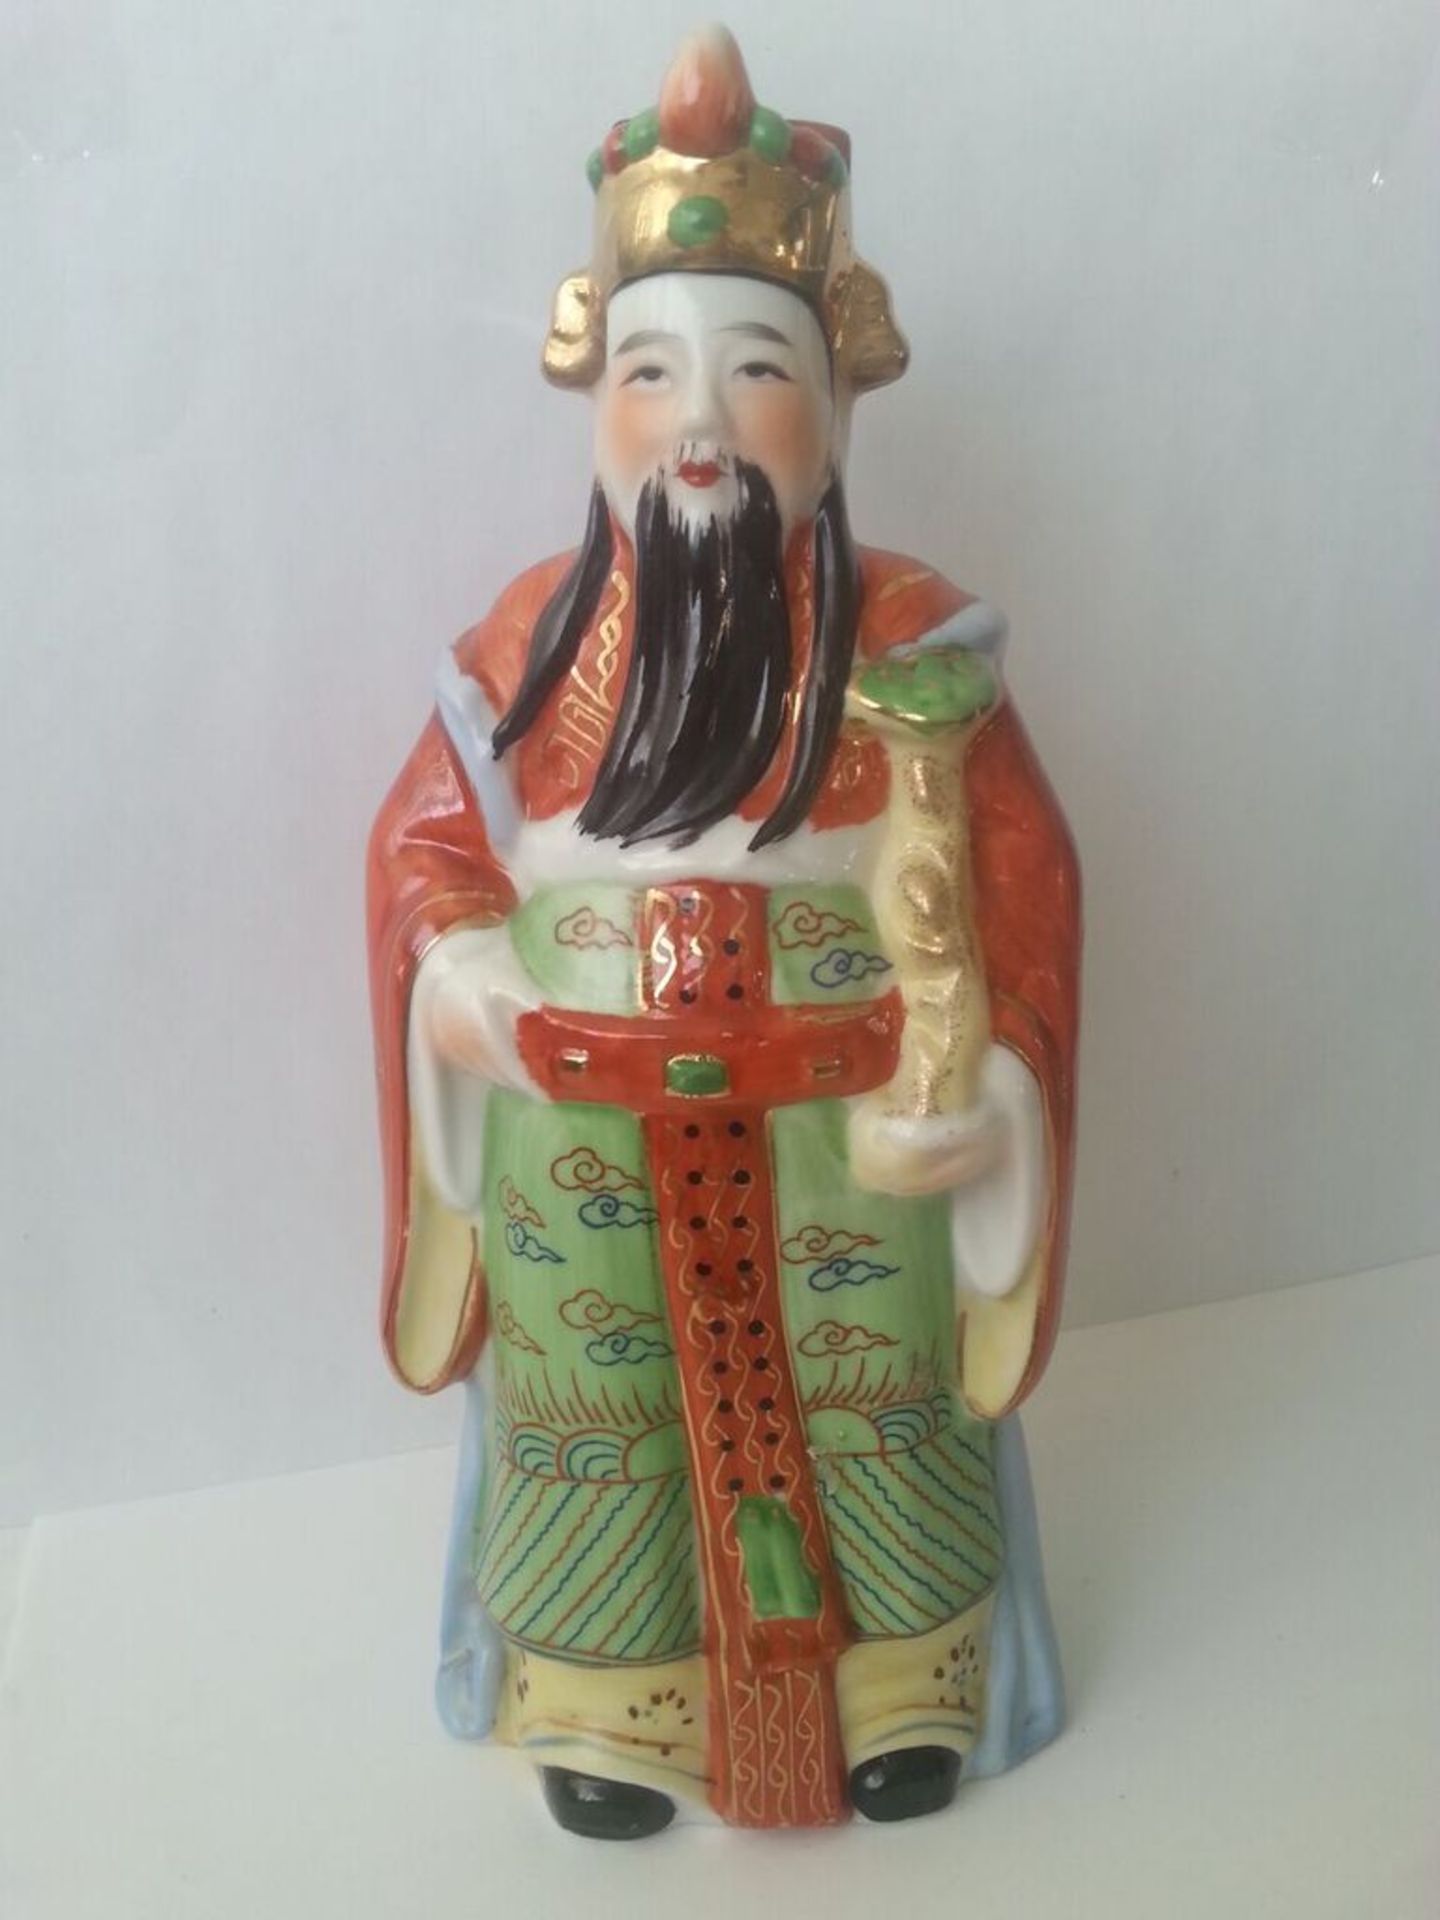 Handpainted chinese figure standing at approx 22cm tall. Condition - Good, no obvious damage.